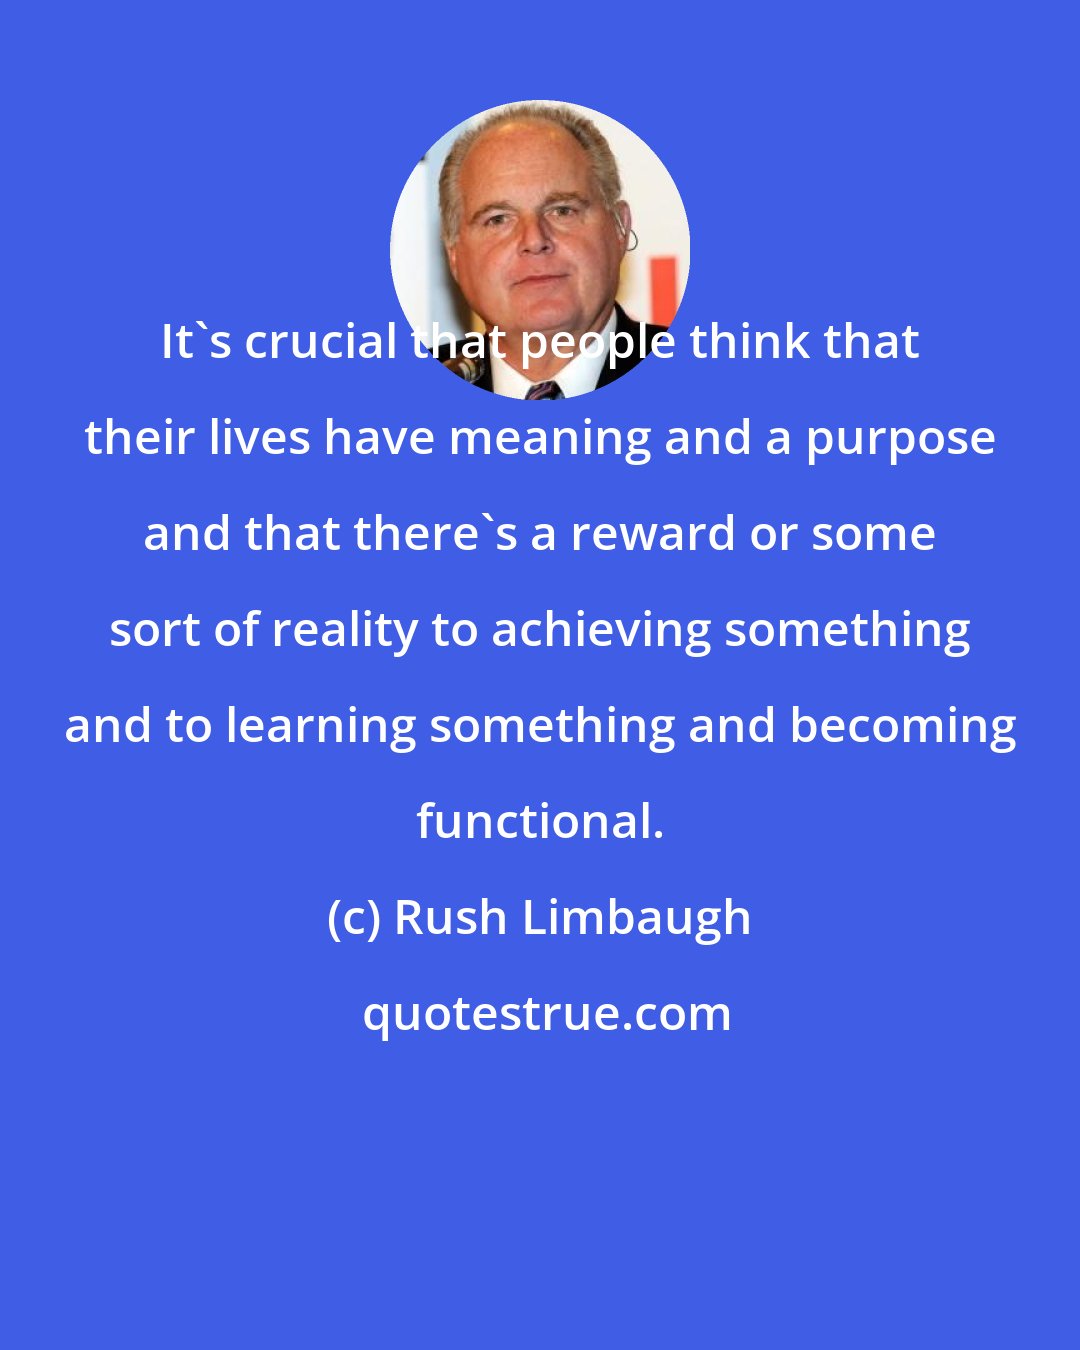 Rush Limbaugh: It's crucial that people think that their lives have meaning and a purpose and that there's a reward or some sort of reality to achieving something and to learning something and becoming functional.